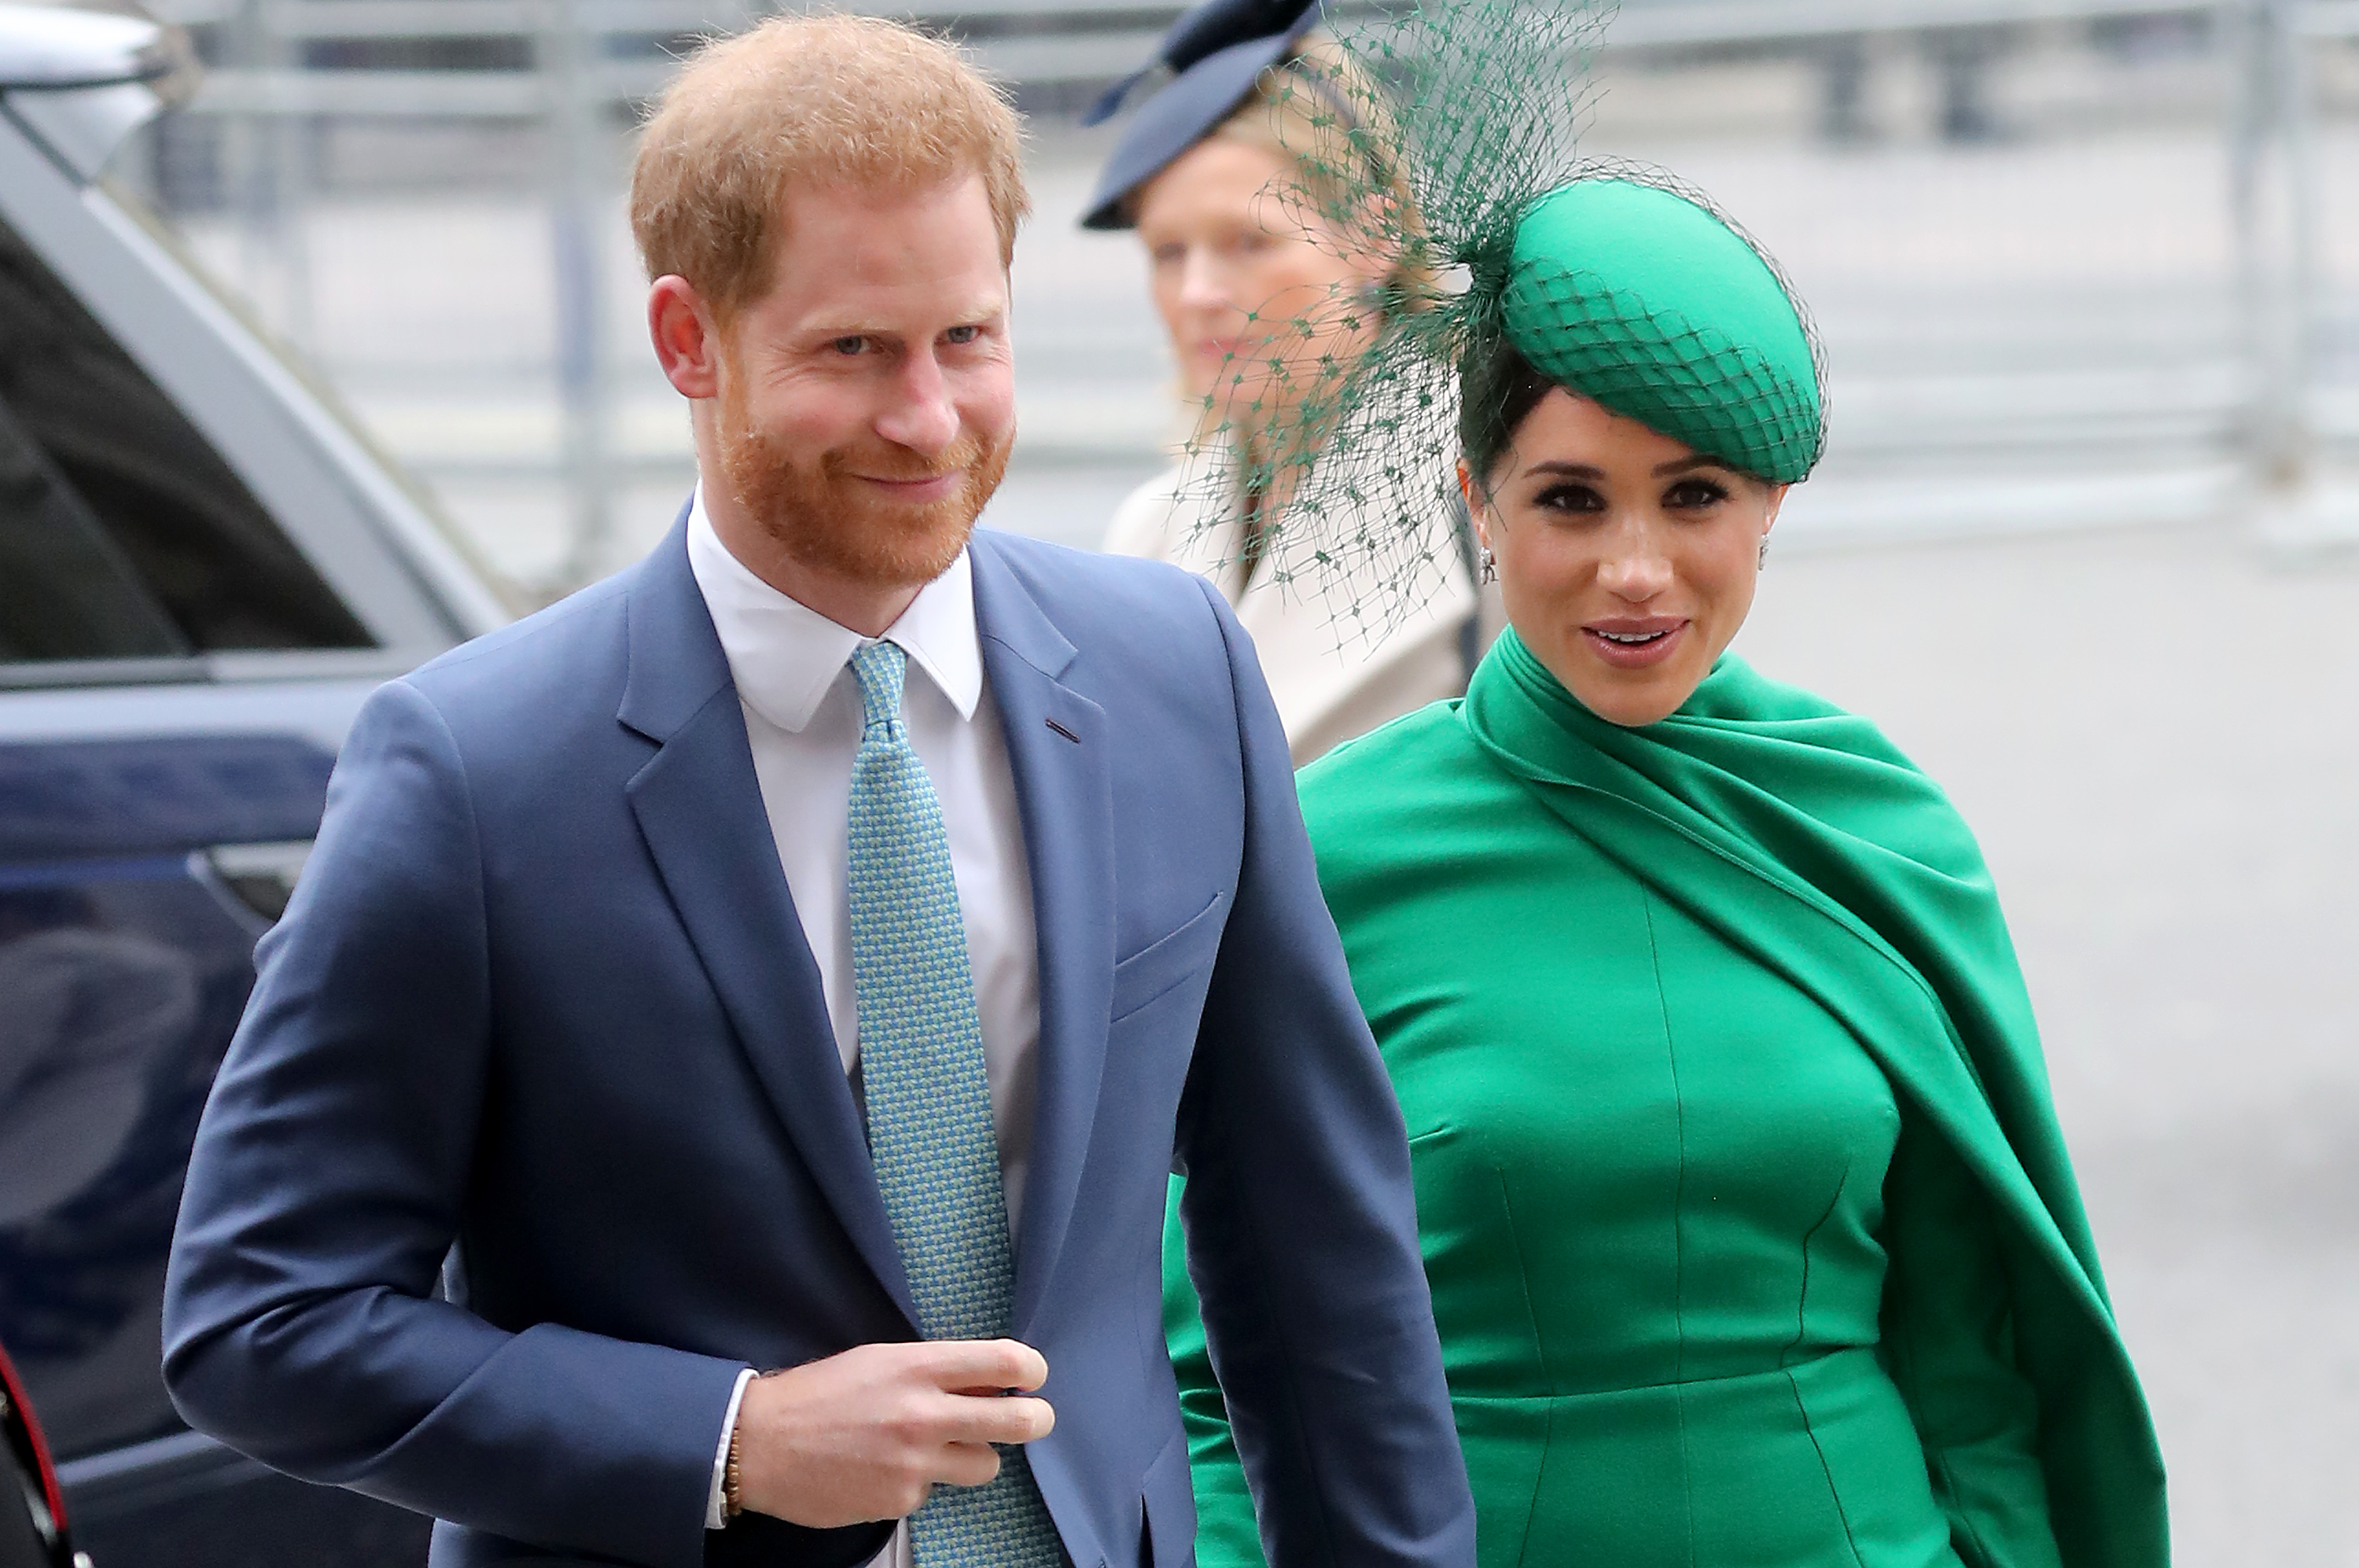 Prince Harry and Meghan Markle on March 9, 2020, in London, England. | Source: Getty Images